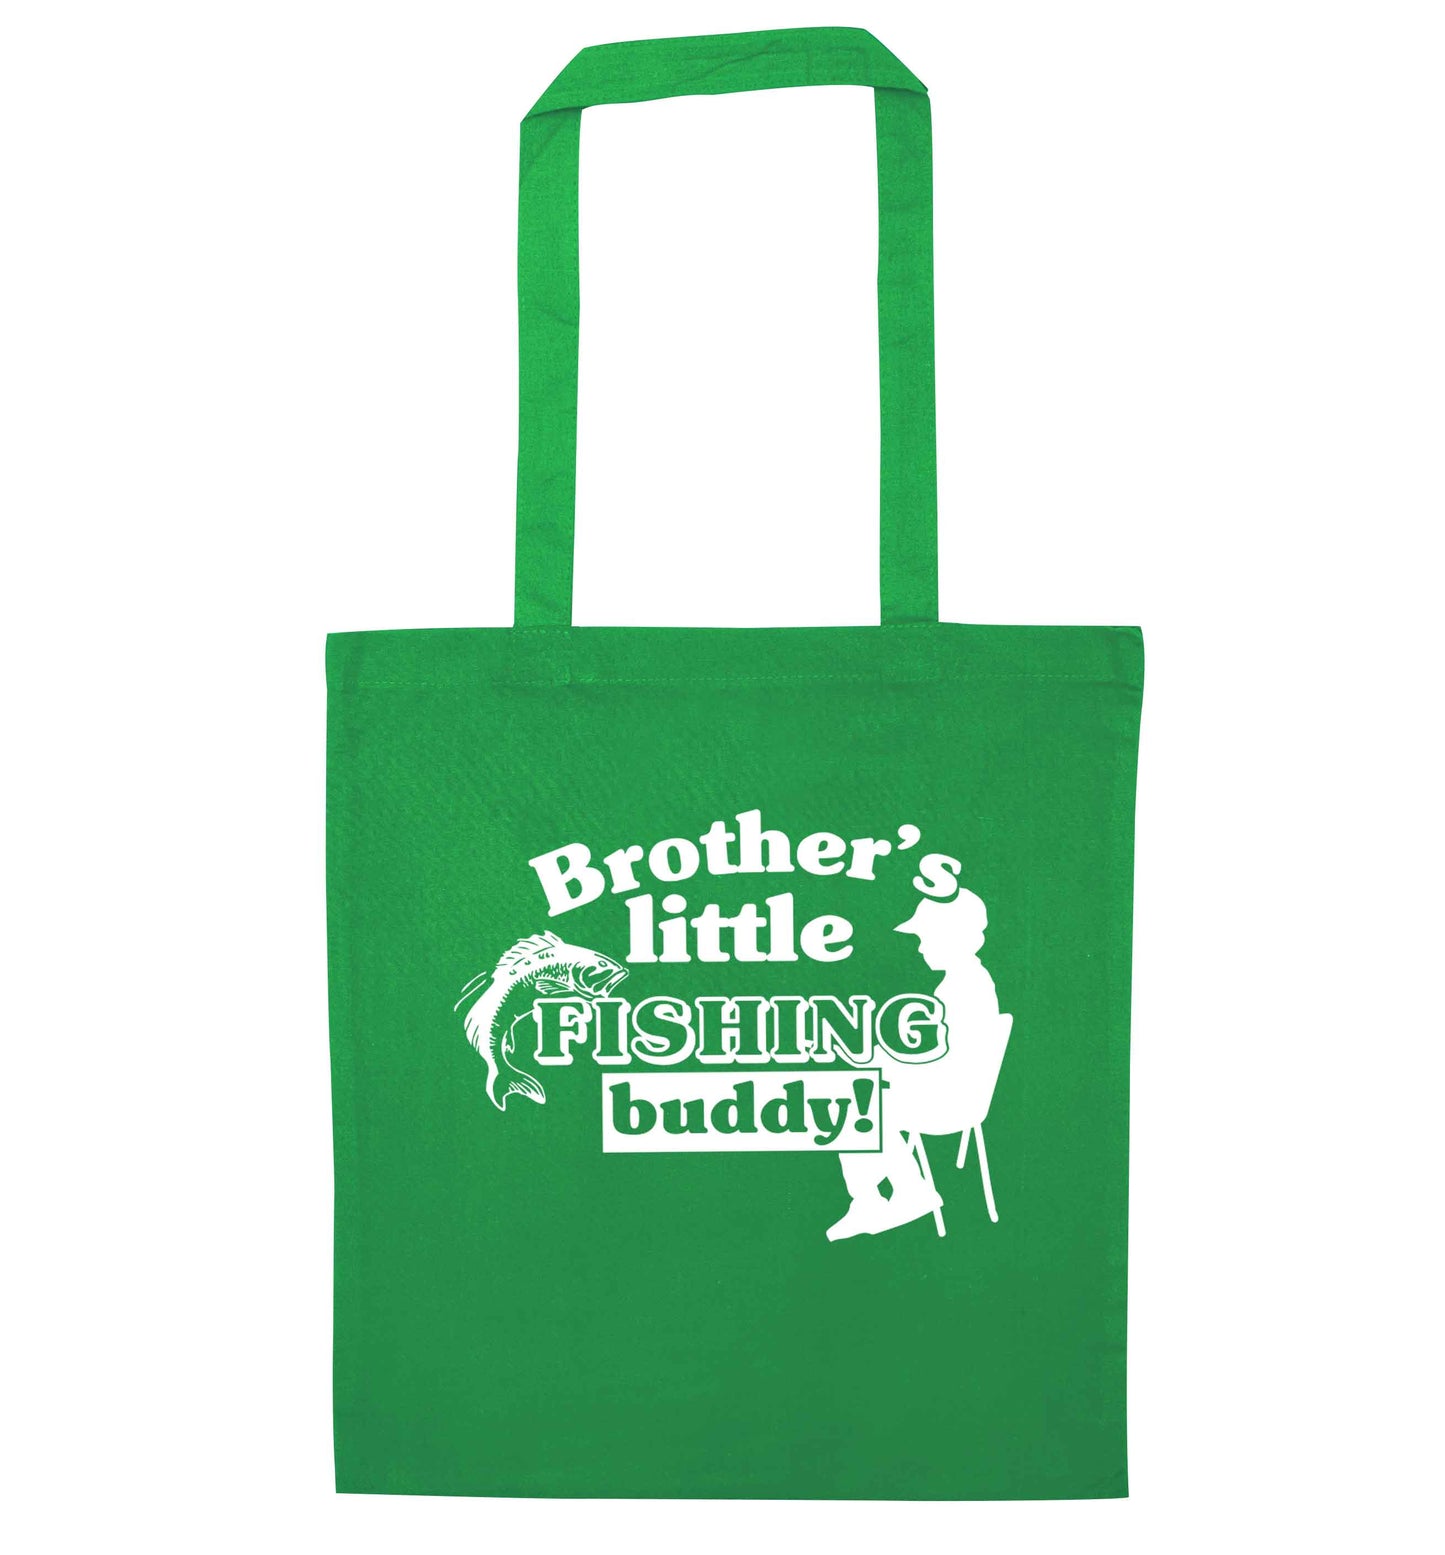 Brother's little fishing buddy green tote bag